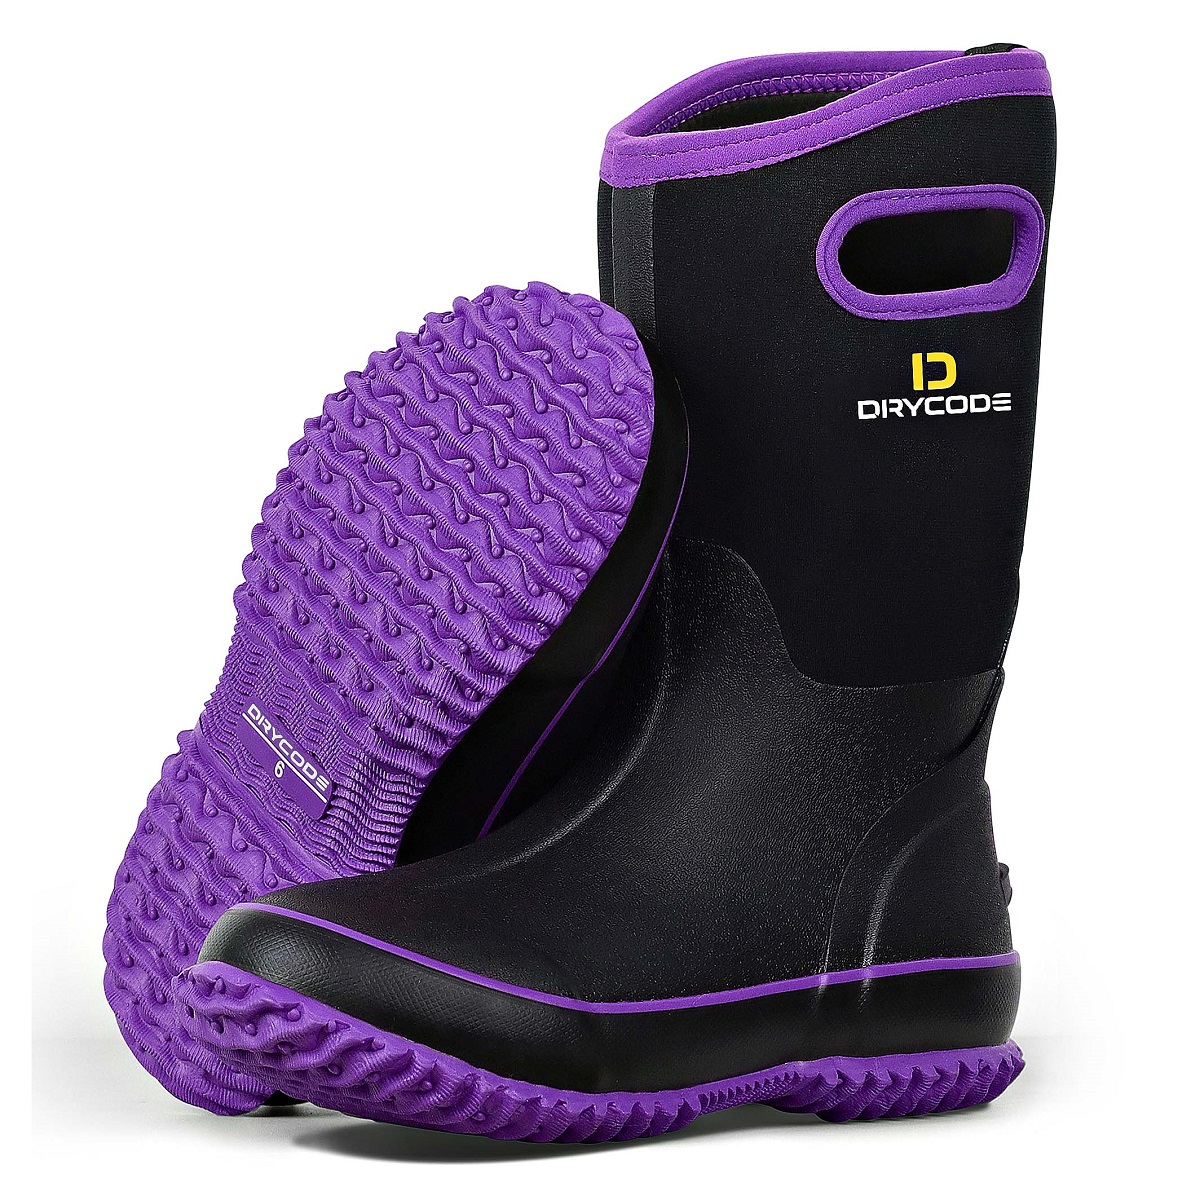 DRYCODE Rubber Boots (Purple) for Women's Gardening Farming